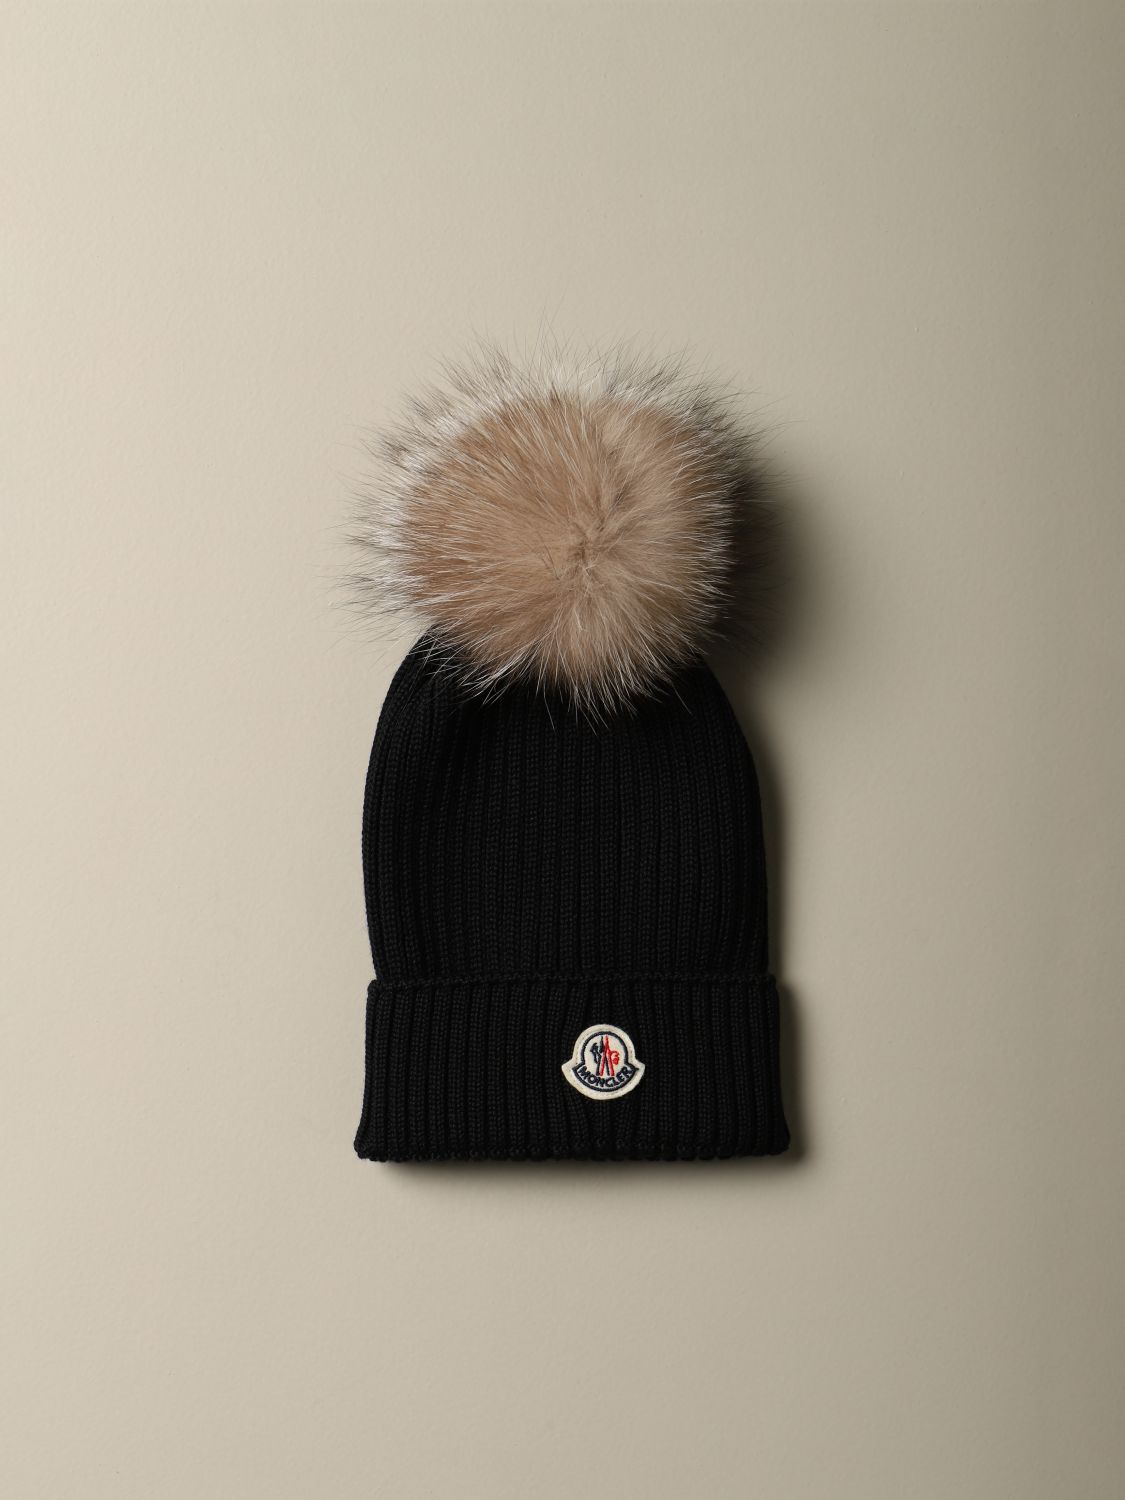 MONCLER: wool hat with maxi pompom - Black | Moncler girls' hats ...